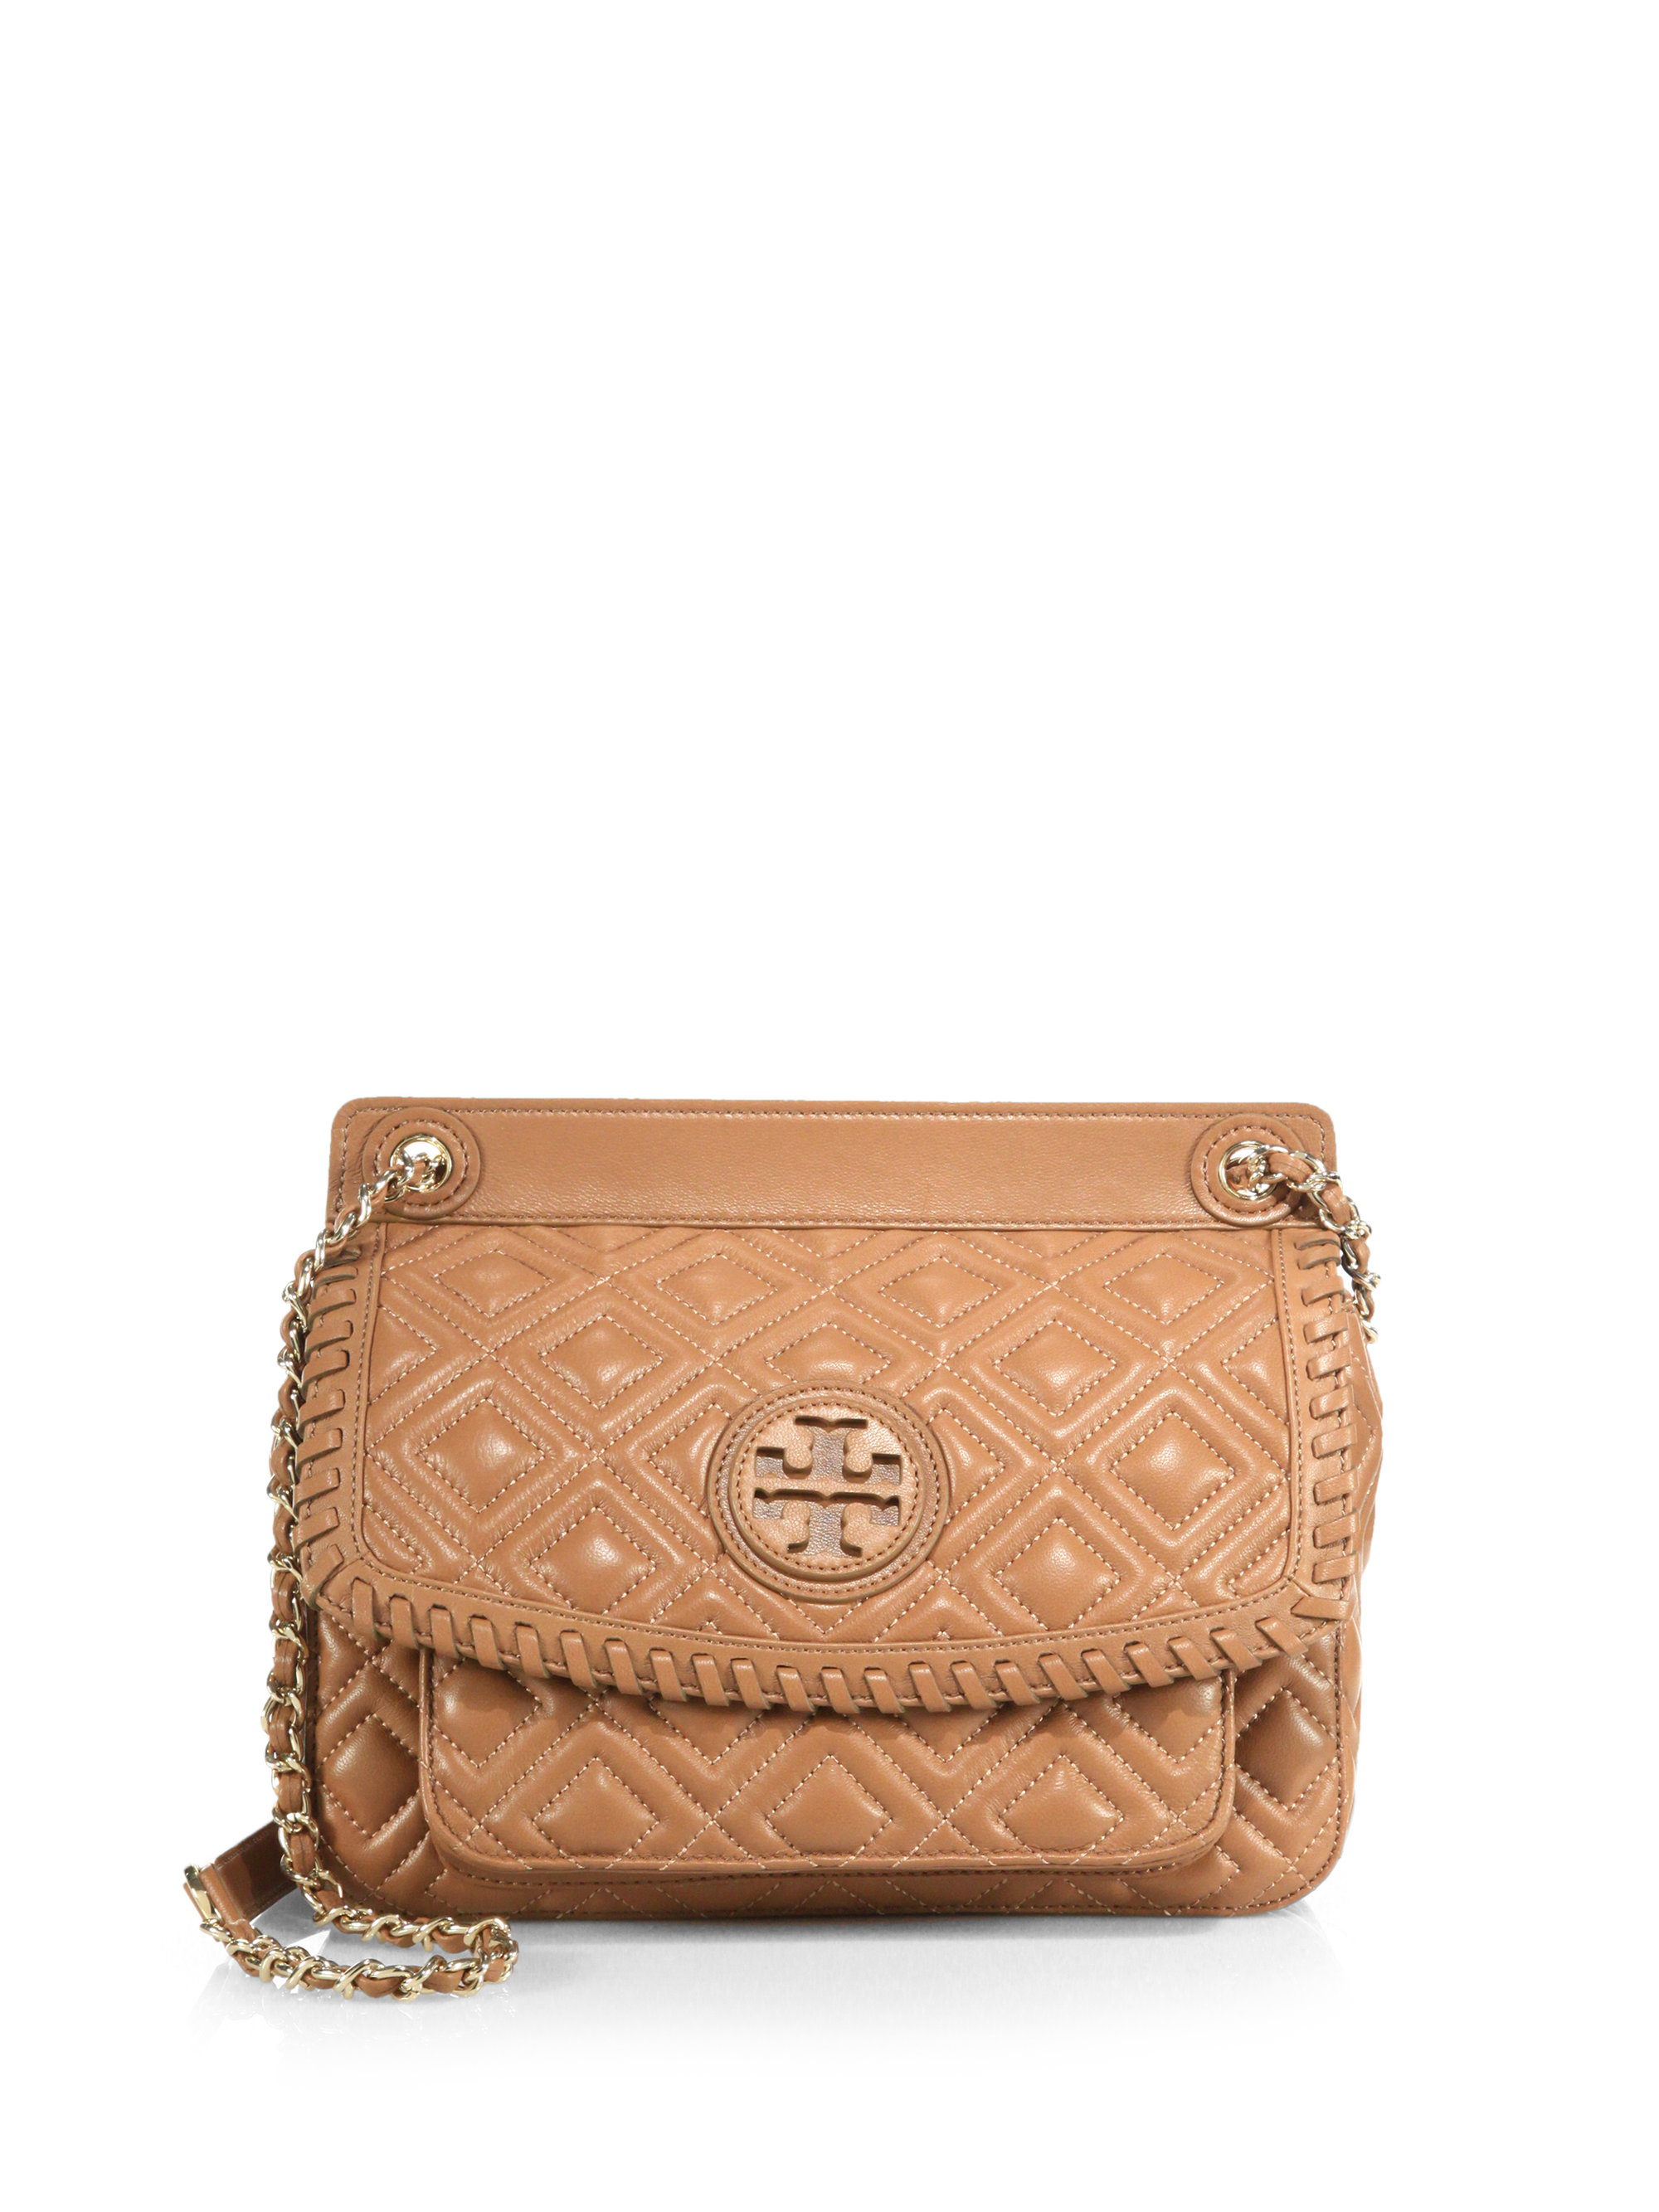 Tory Burch Marion Quilted Shoulder Bag in Brown (TIGERS EYE) | Lyst